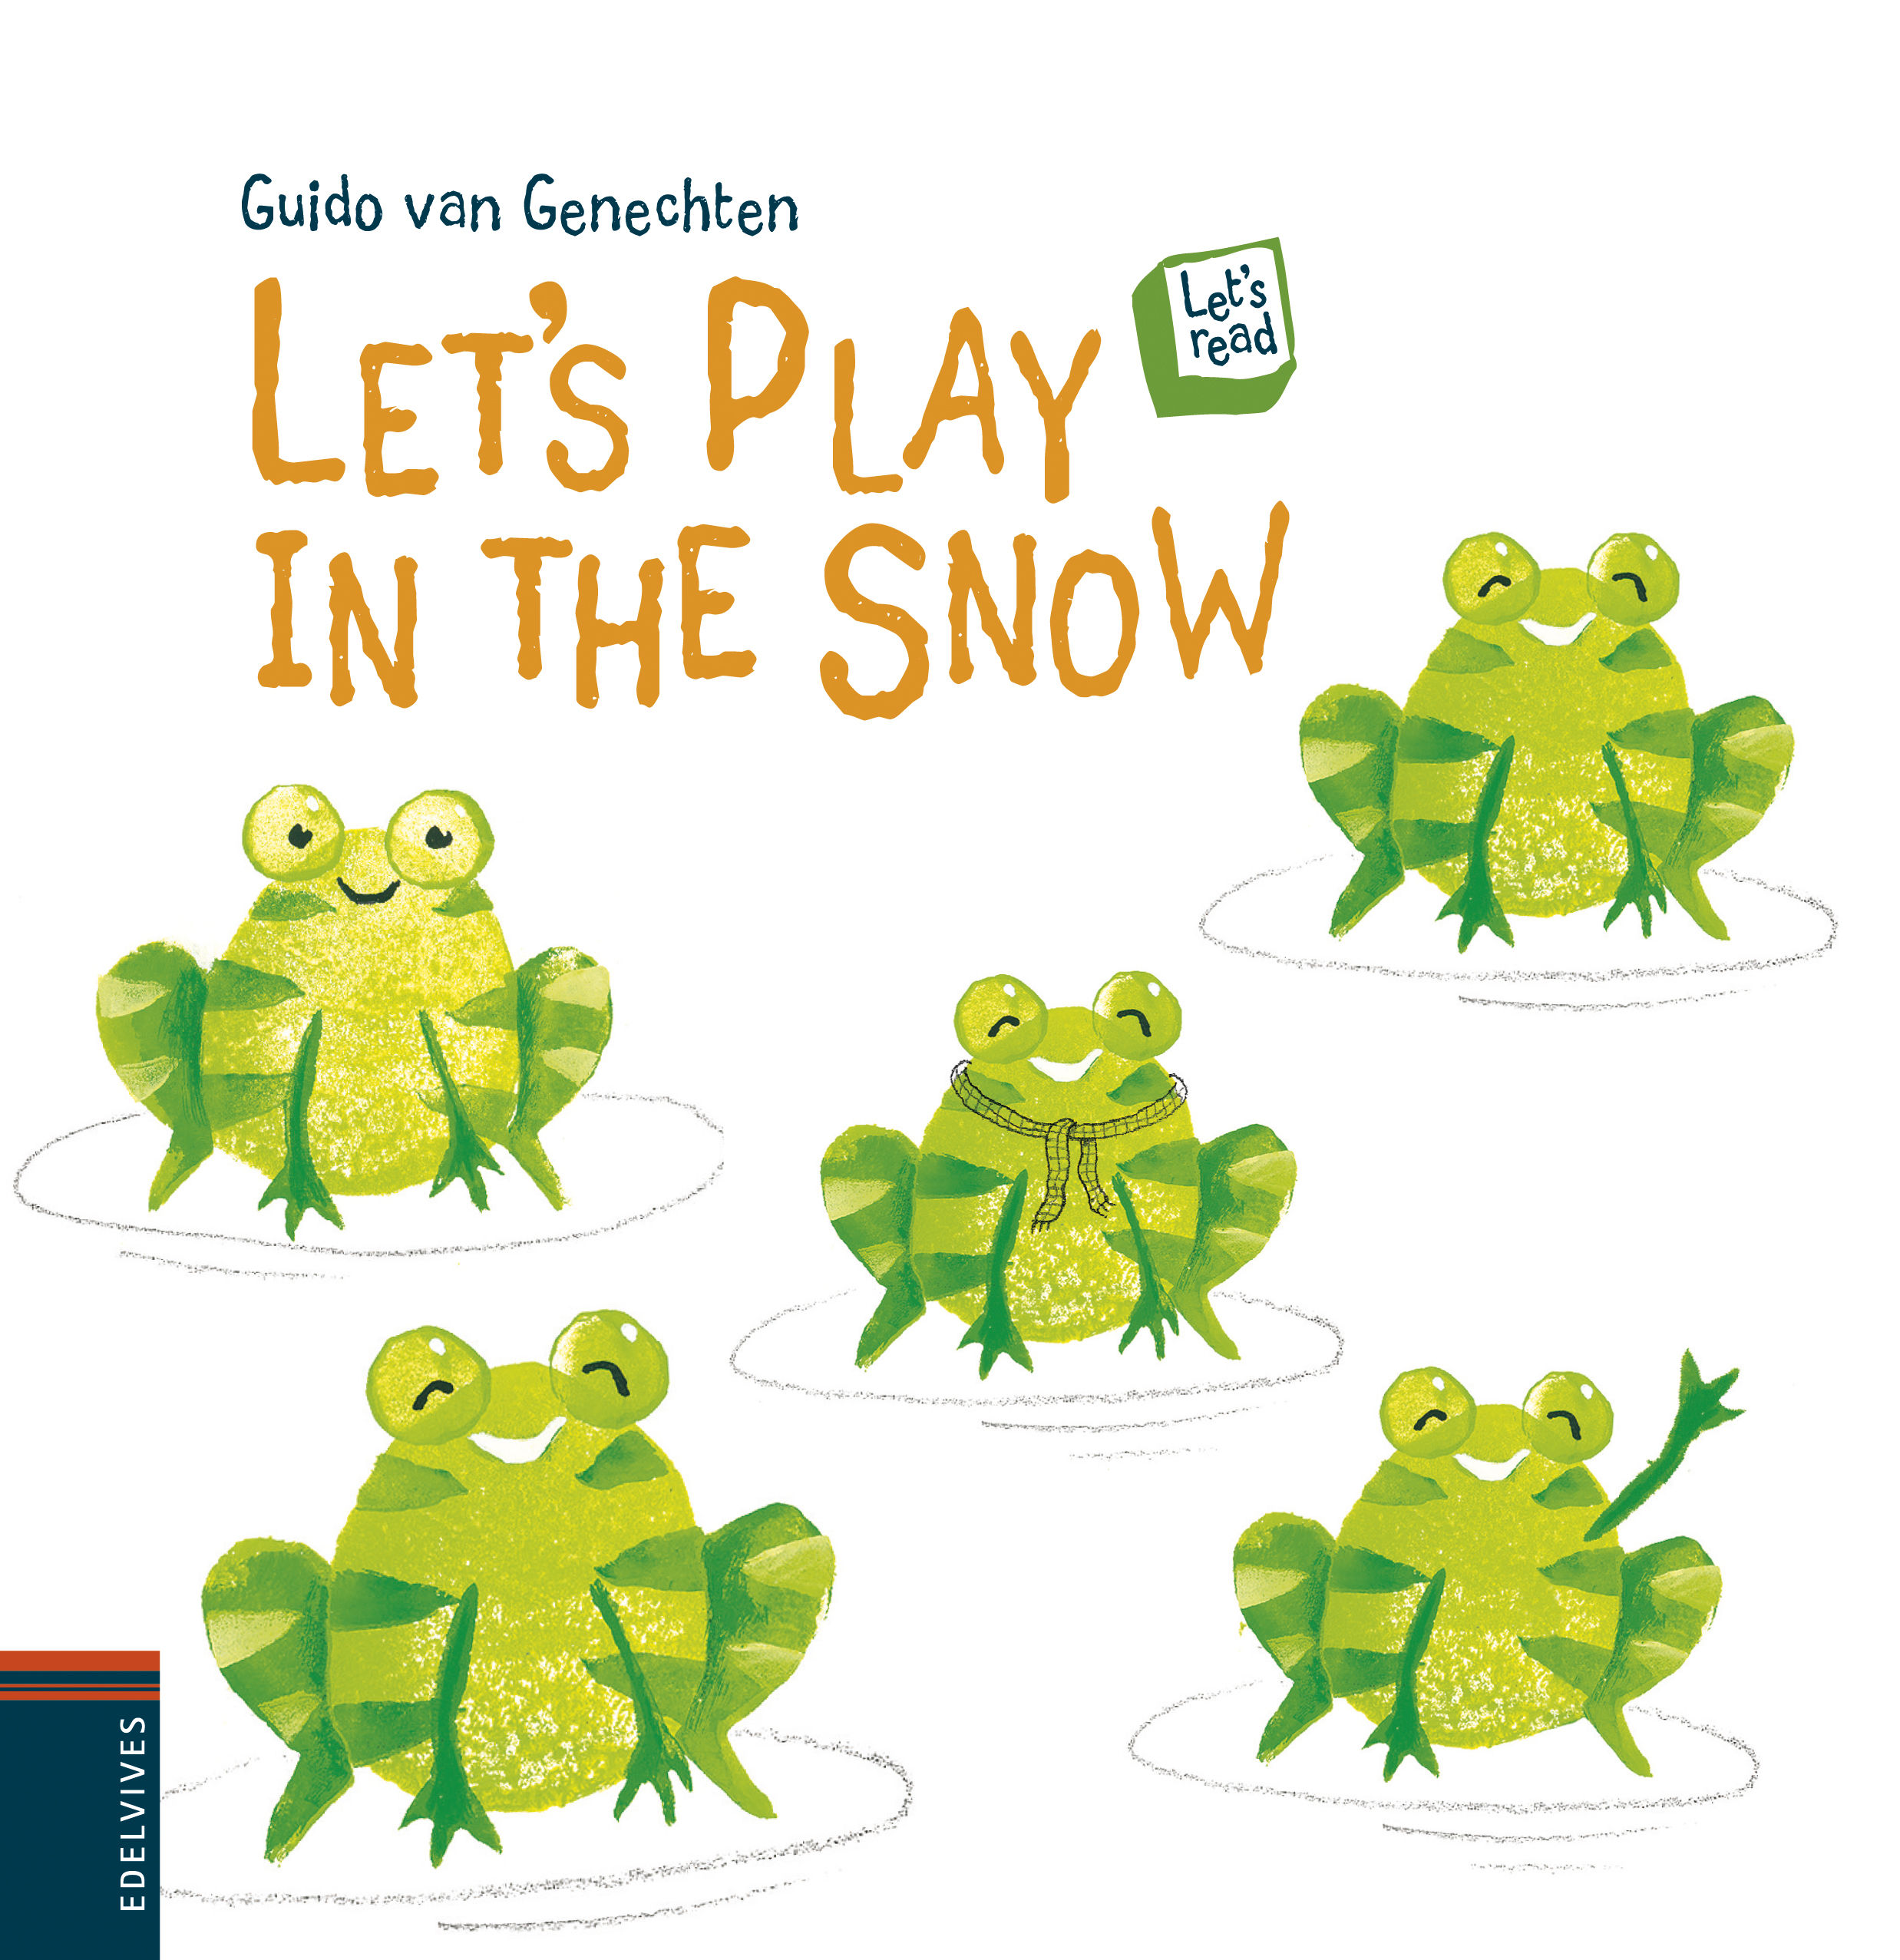 LET'S PLAY IN THE SNOW. 